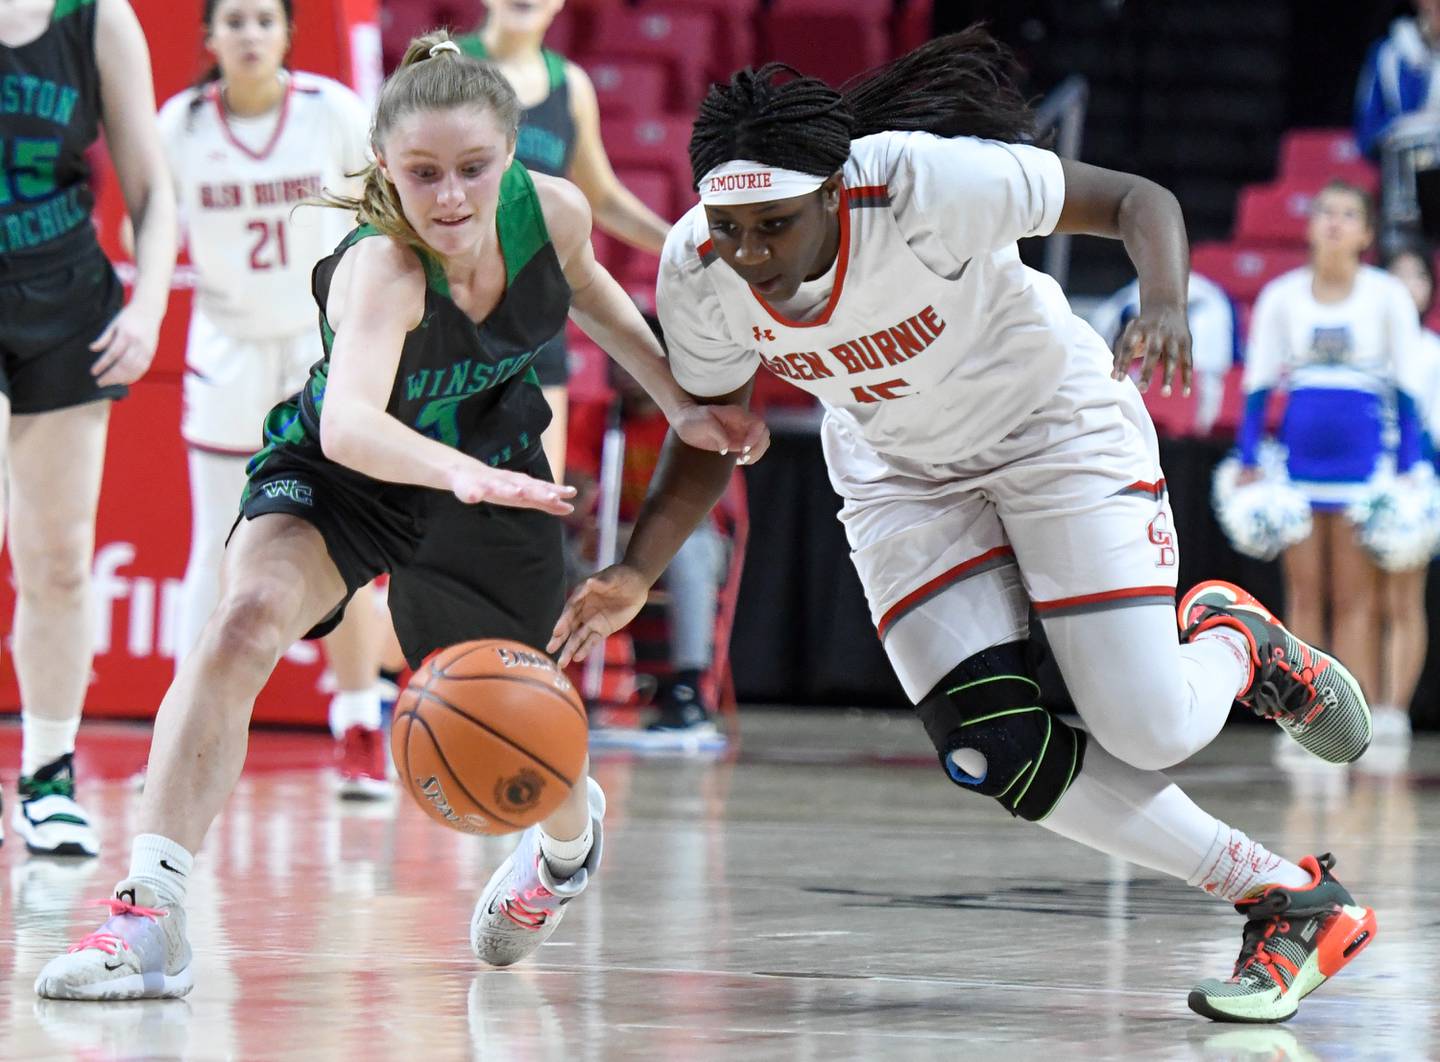 Glen Burnie's Amourie Porter, right, and Churchill's Chelsea Calkins vie for a loose ball during the Class 4A state girls basketball final in College Park on Friday, March 10, 2023.